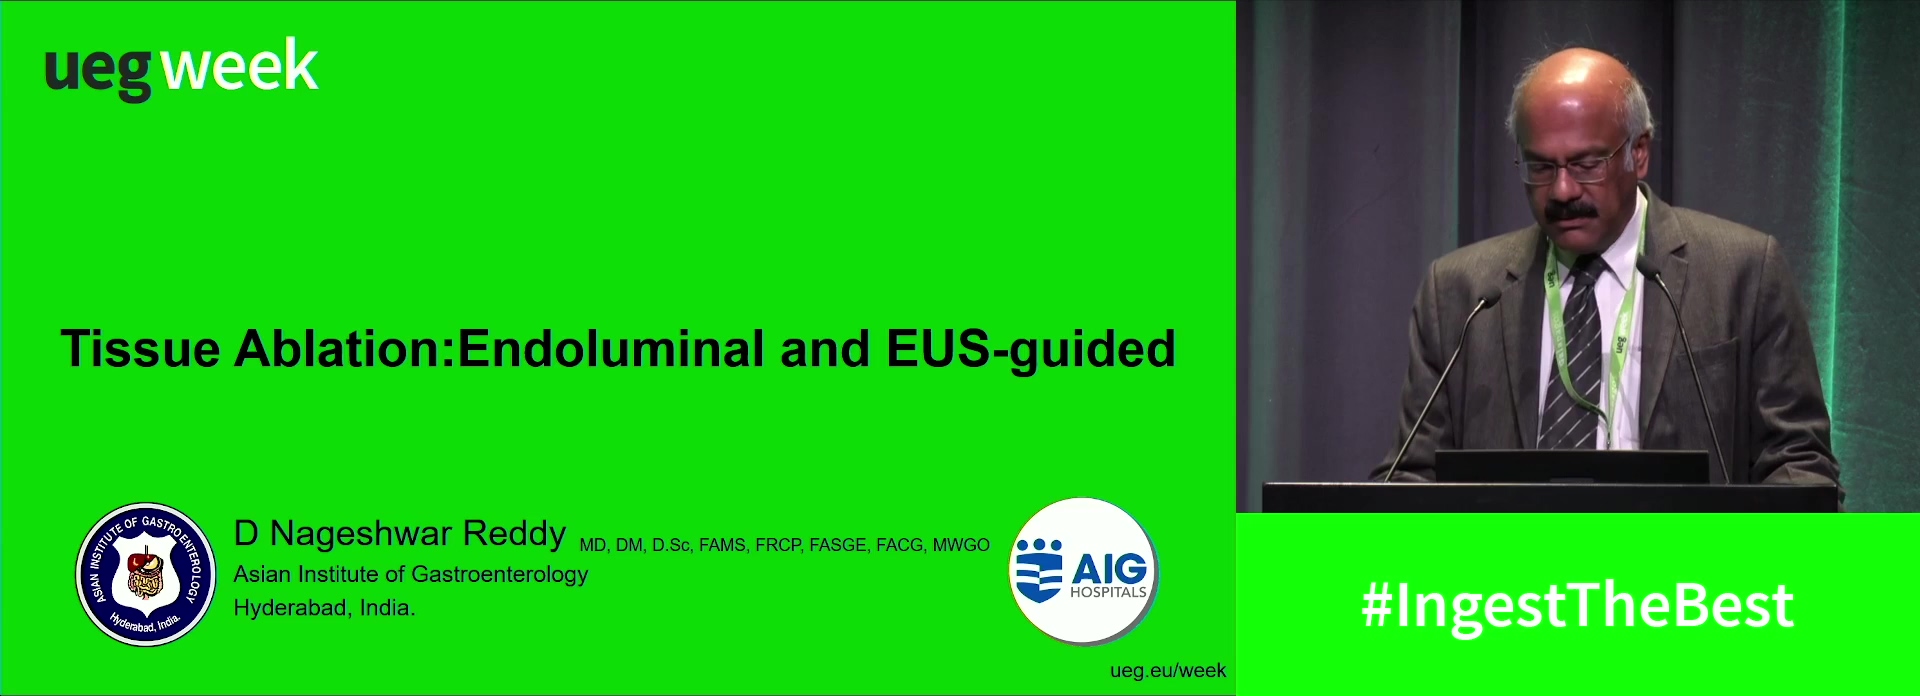 Tissue ablation: Endoluminal and EUS-guided